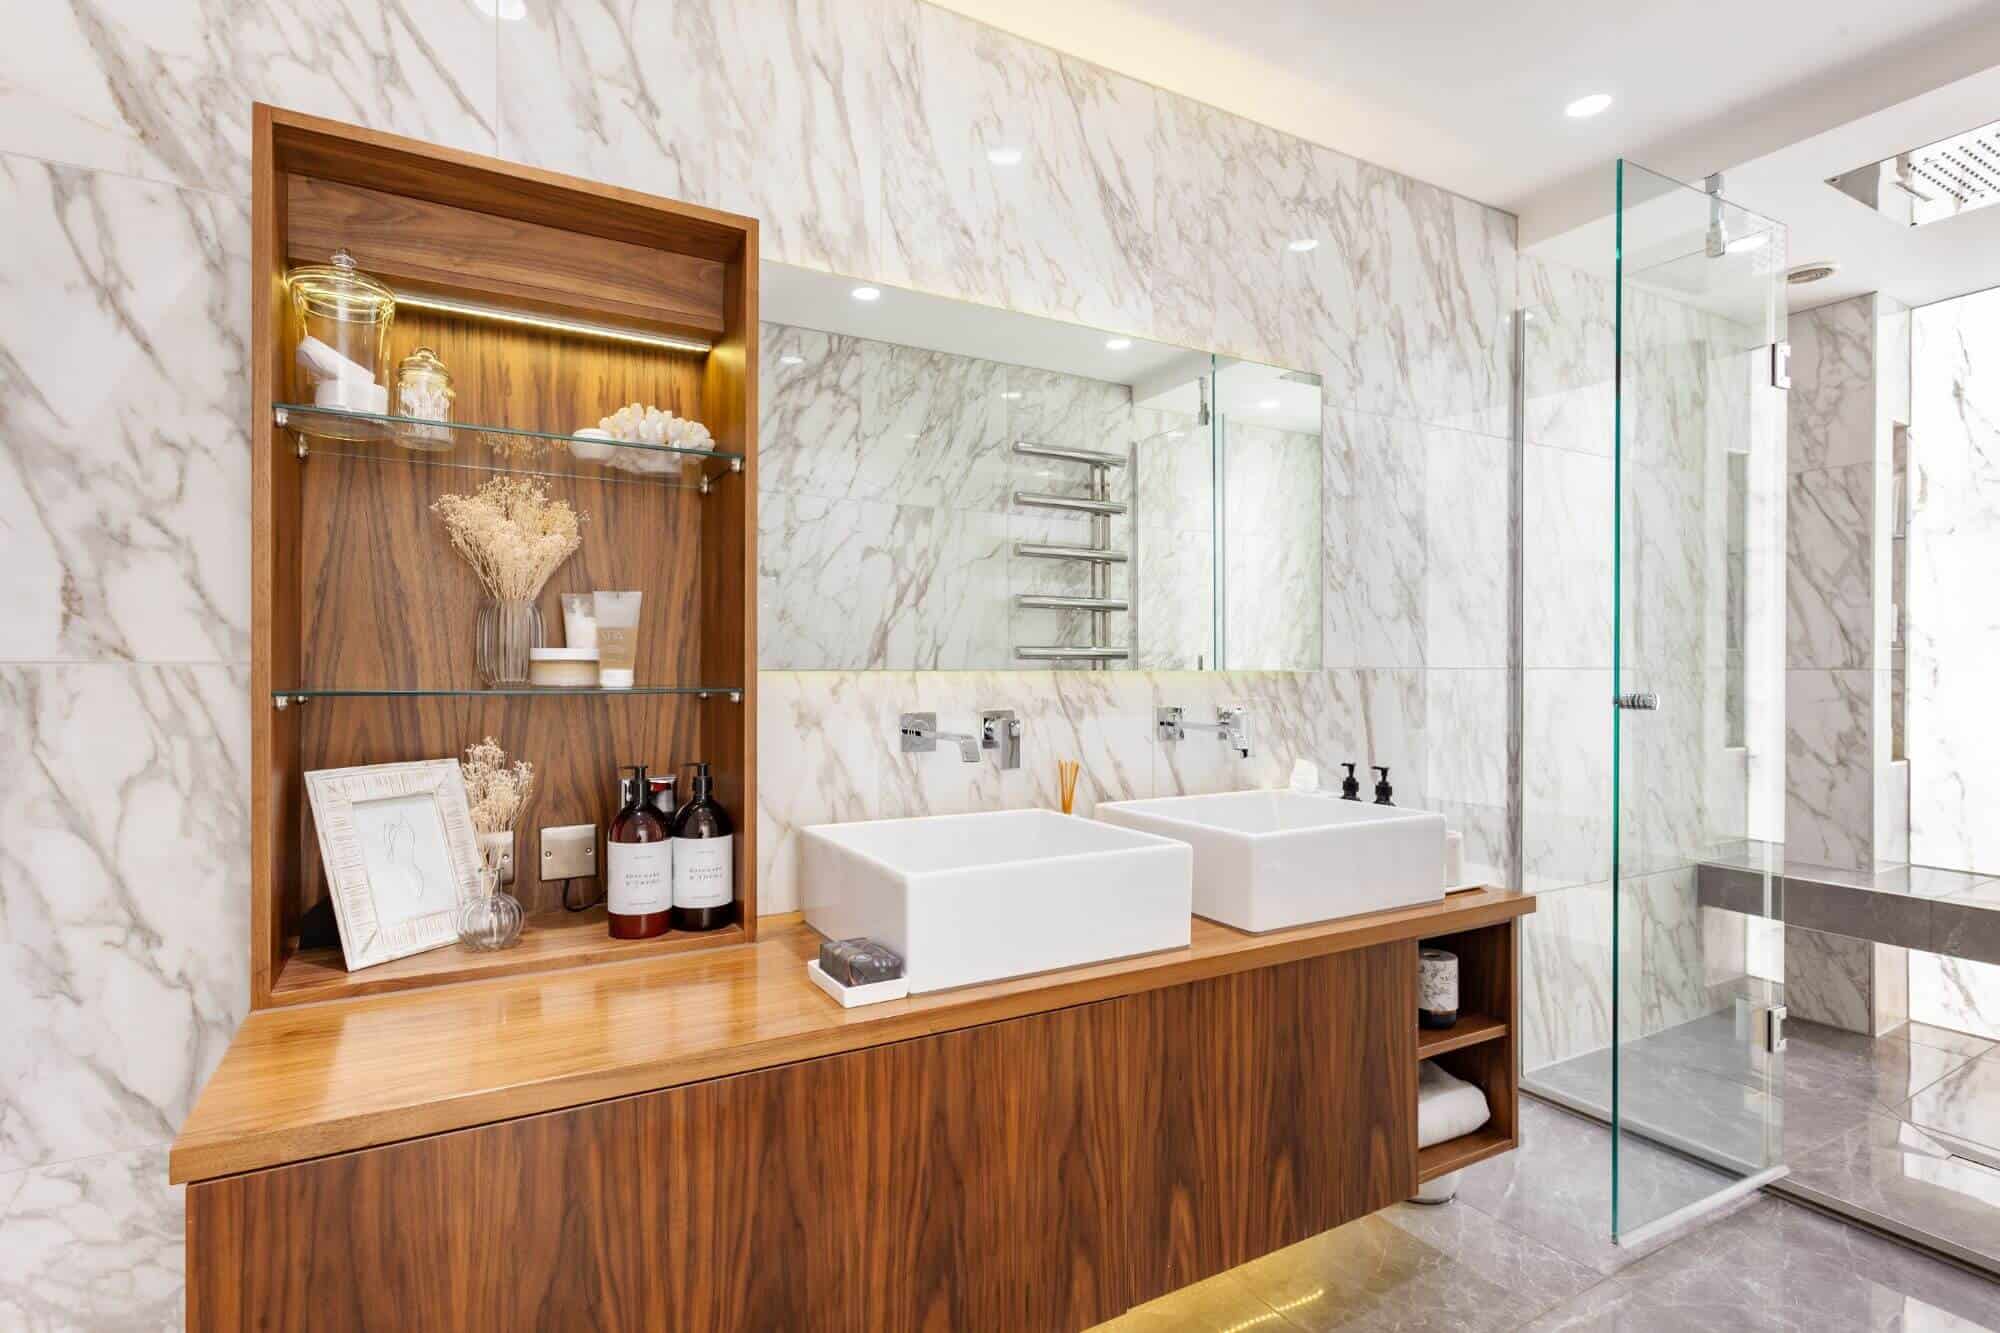 Modern bathroom with floating wall unit containing shelves, sotrage space and two wash basins. The room also contains a walk-in shower with glass doors and marbled wall and floor tiles